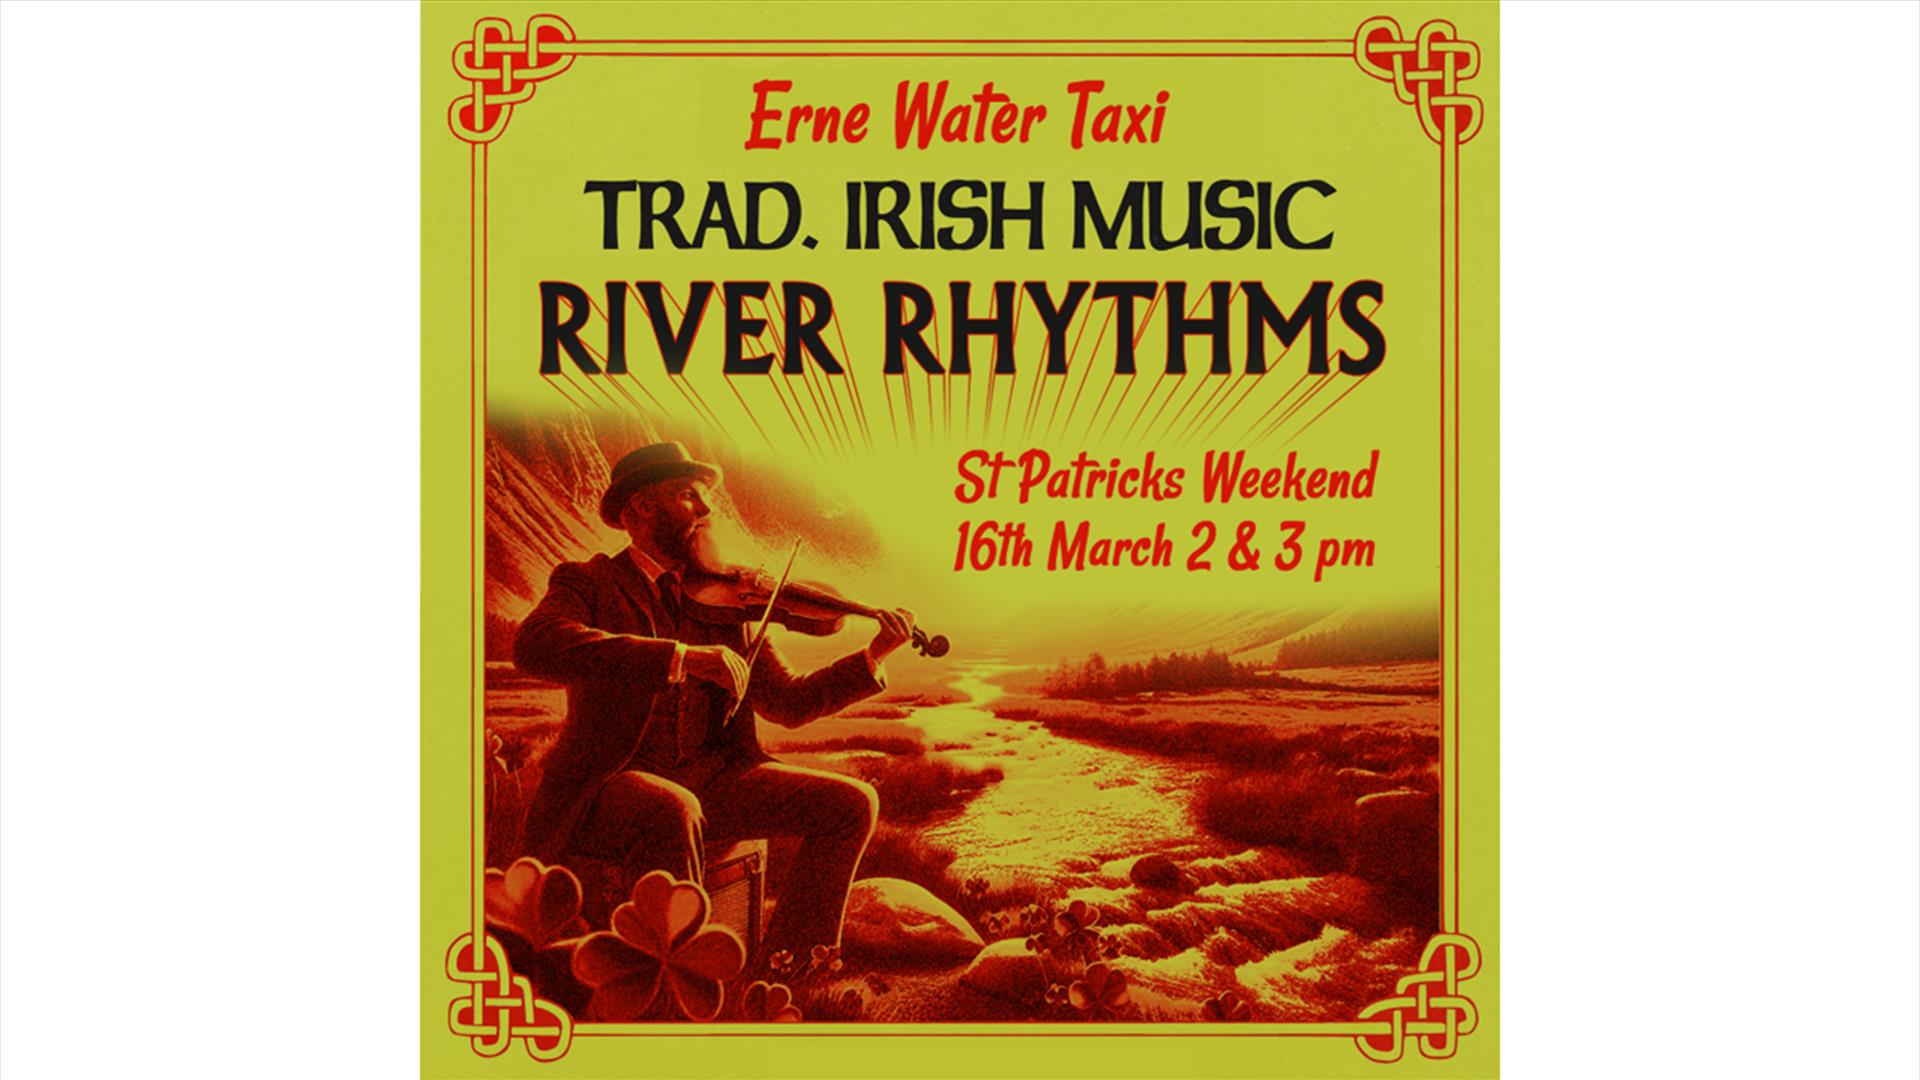 St Patrick's Day - Erne Water Taxi